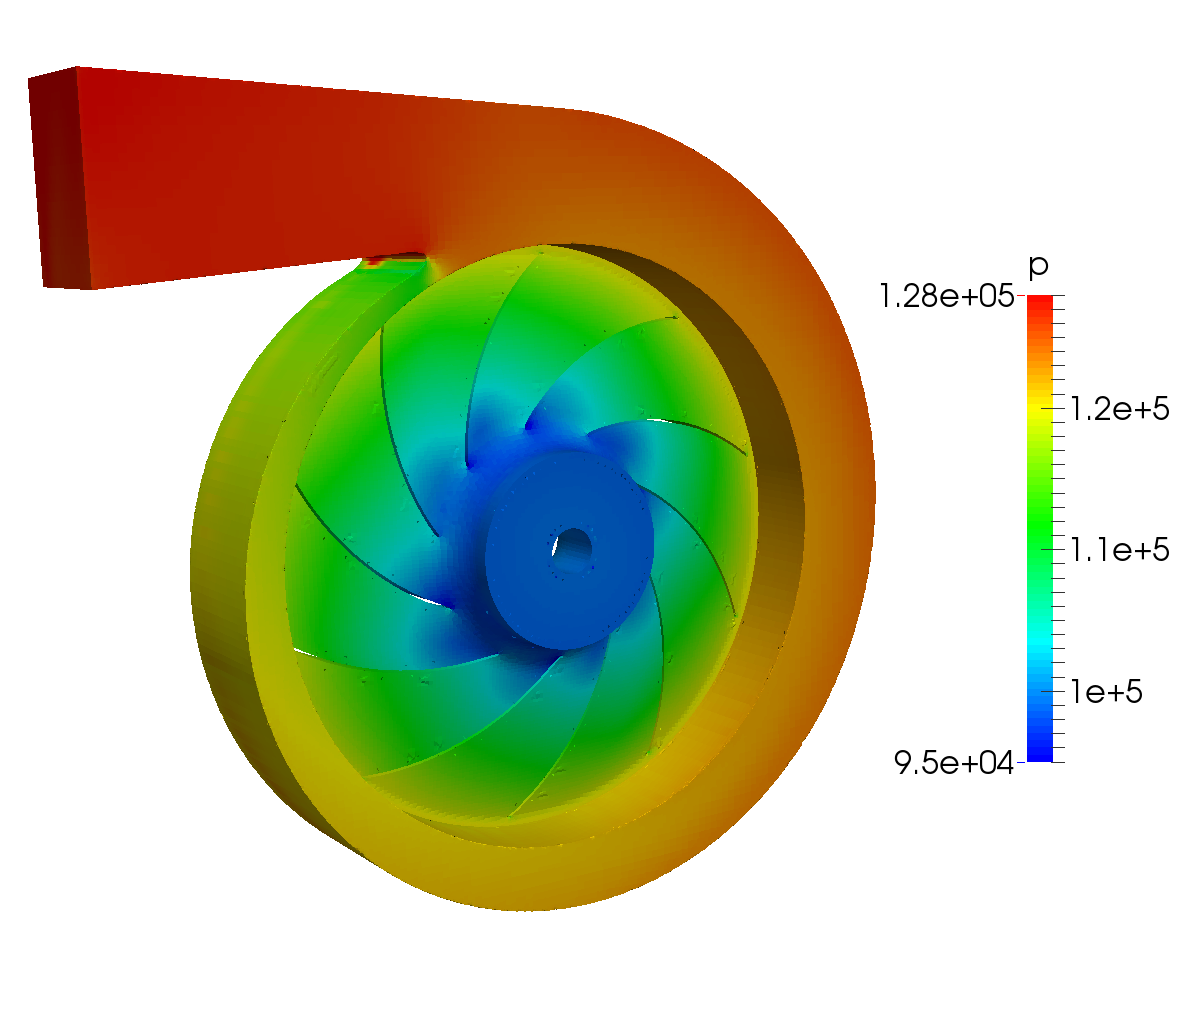 TurbomachineryCFD fan nq28 compressible noHousing pressure